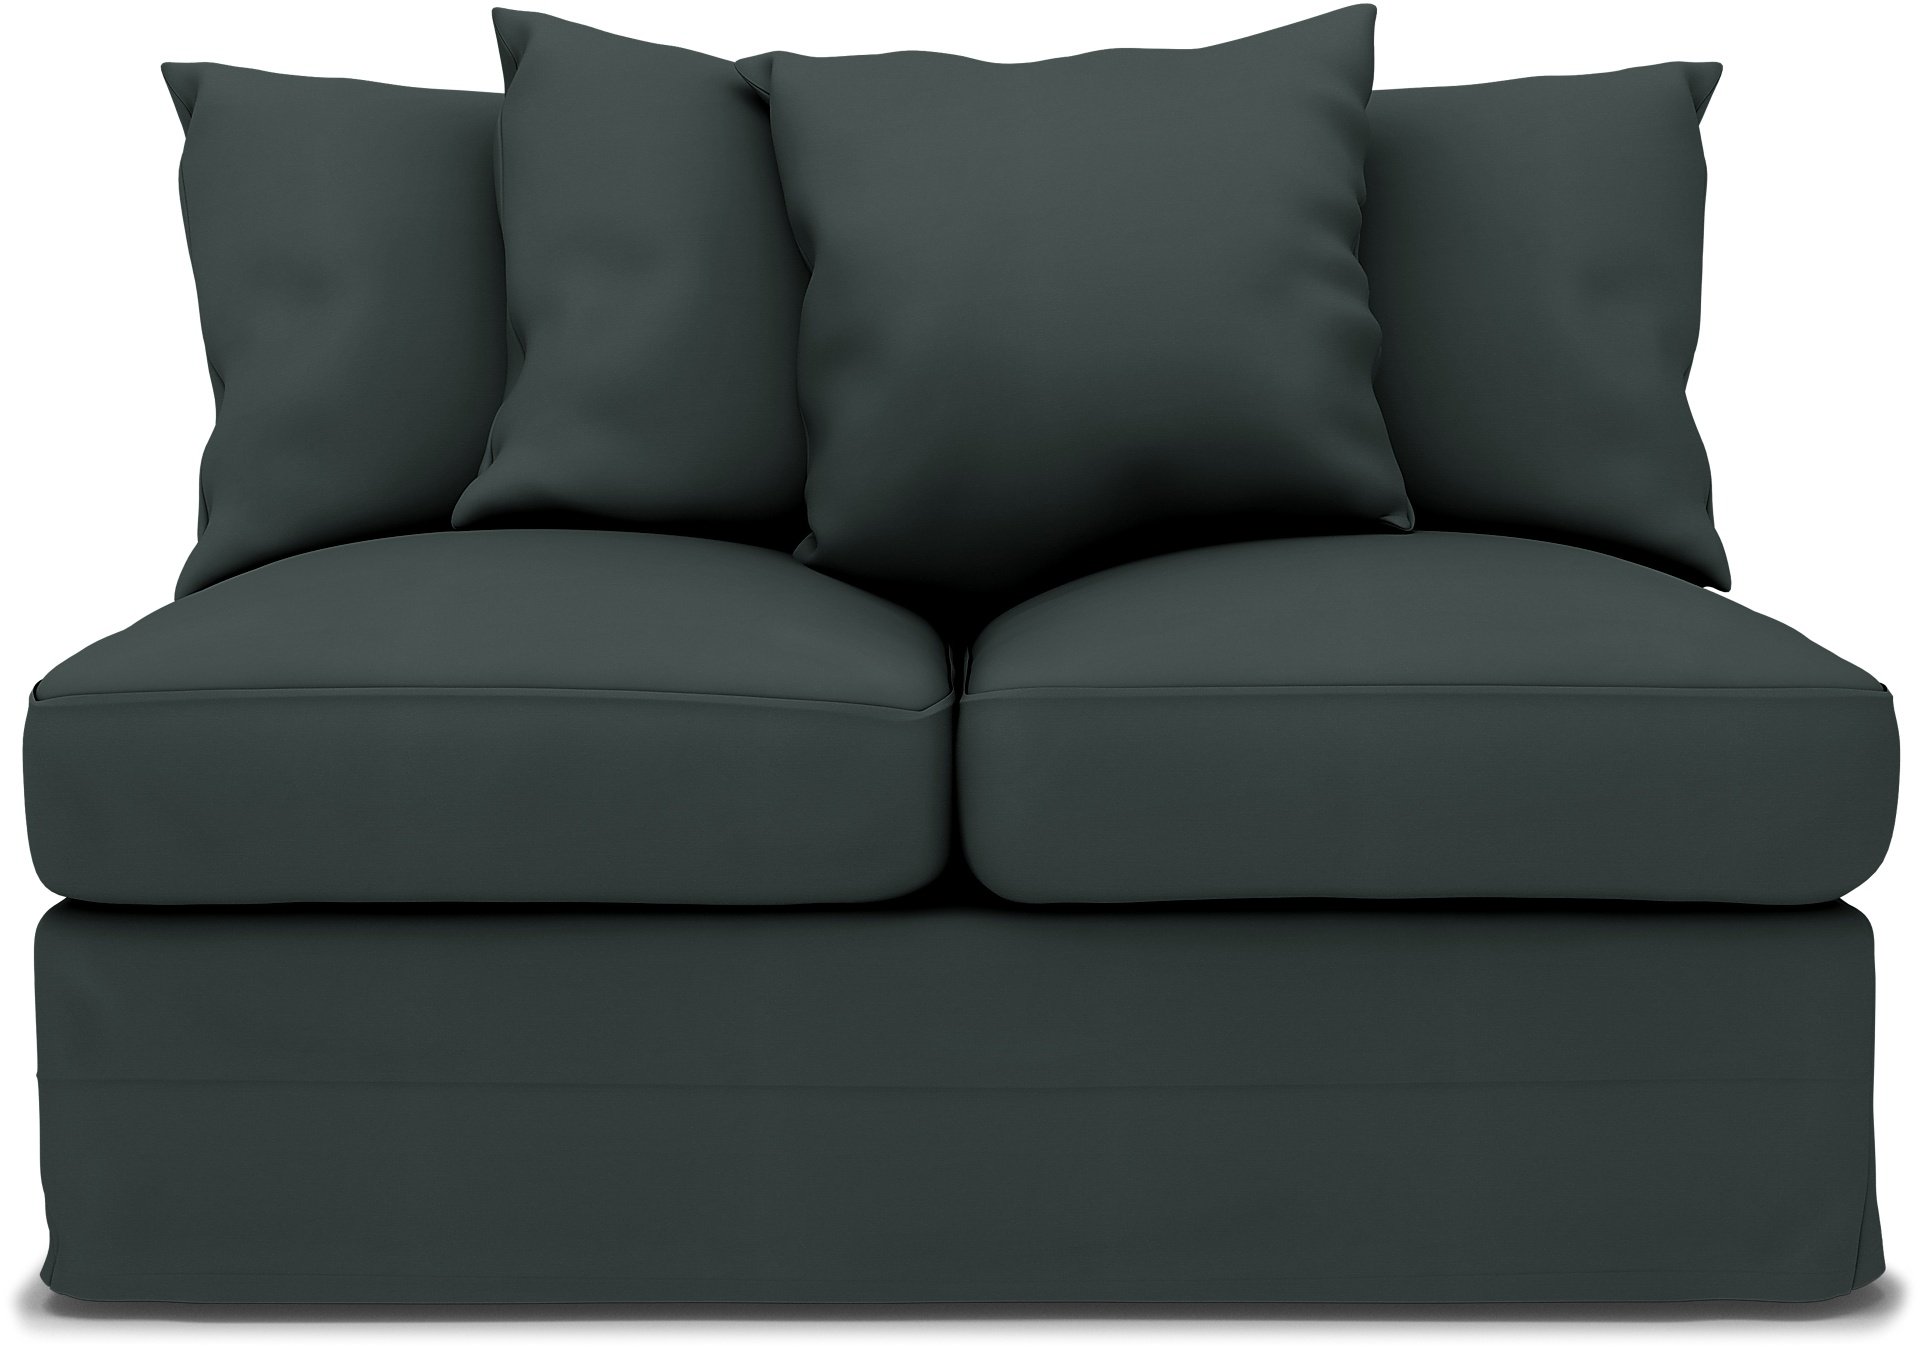 IKEA - IKEA Gronlid 2 seater sofa bed section cover, Graphite Grey, Cotton - Bemz